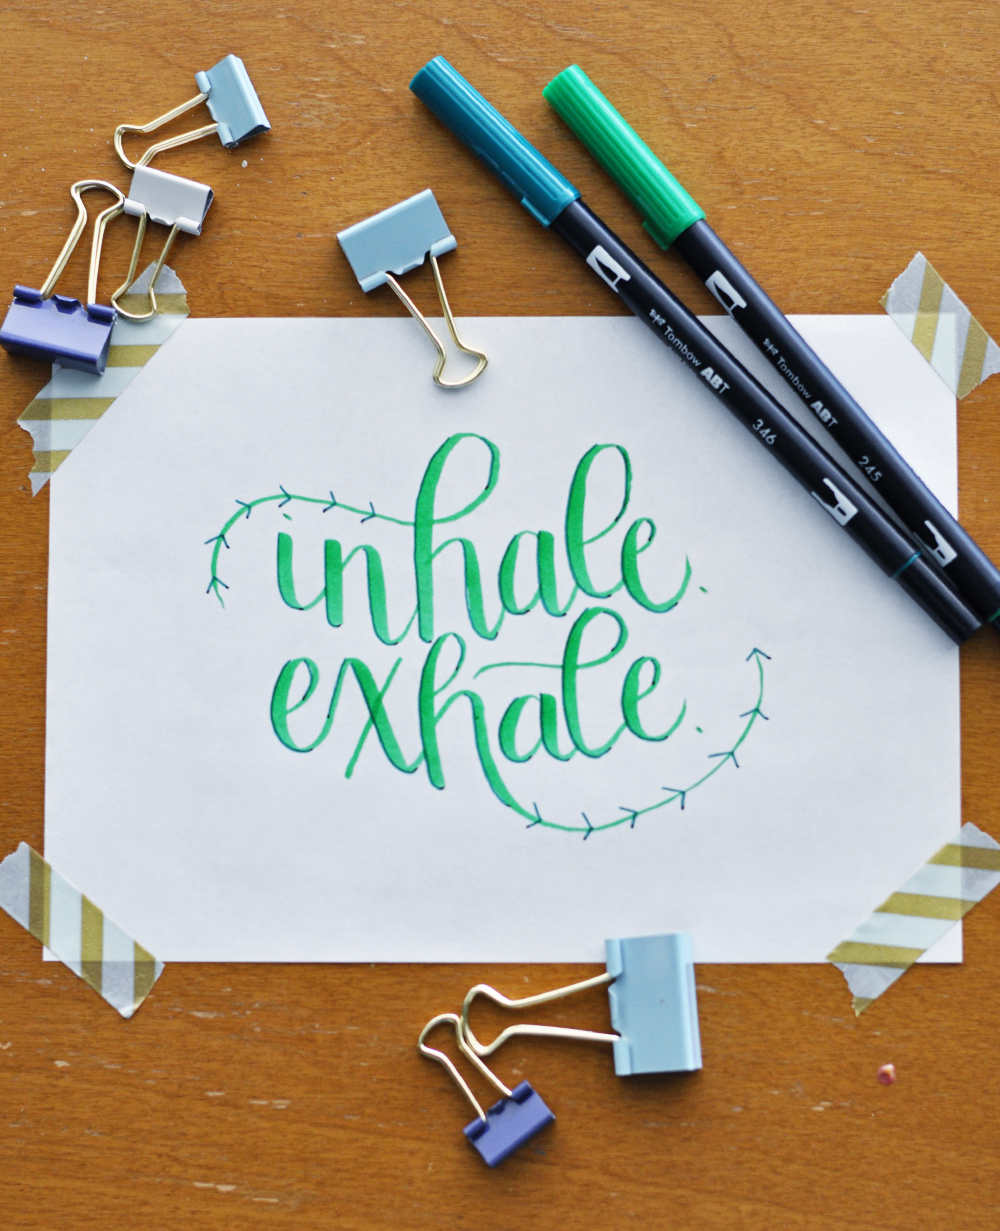 My Mantra For June: INHALE. EXHALE.